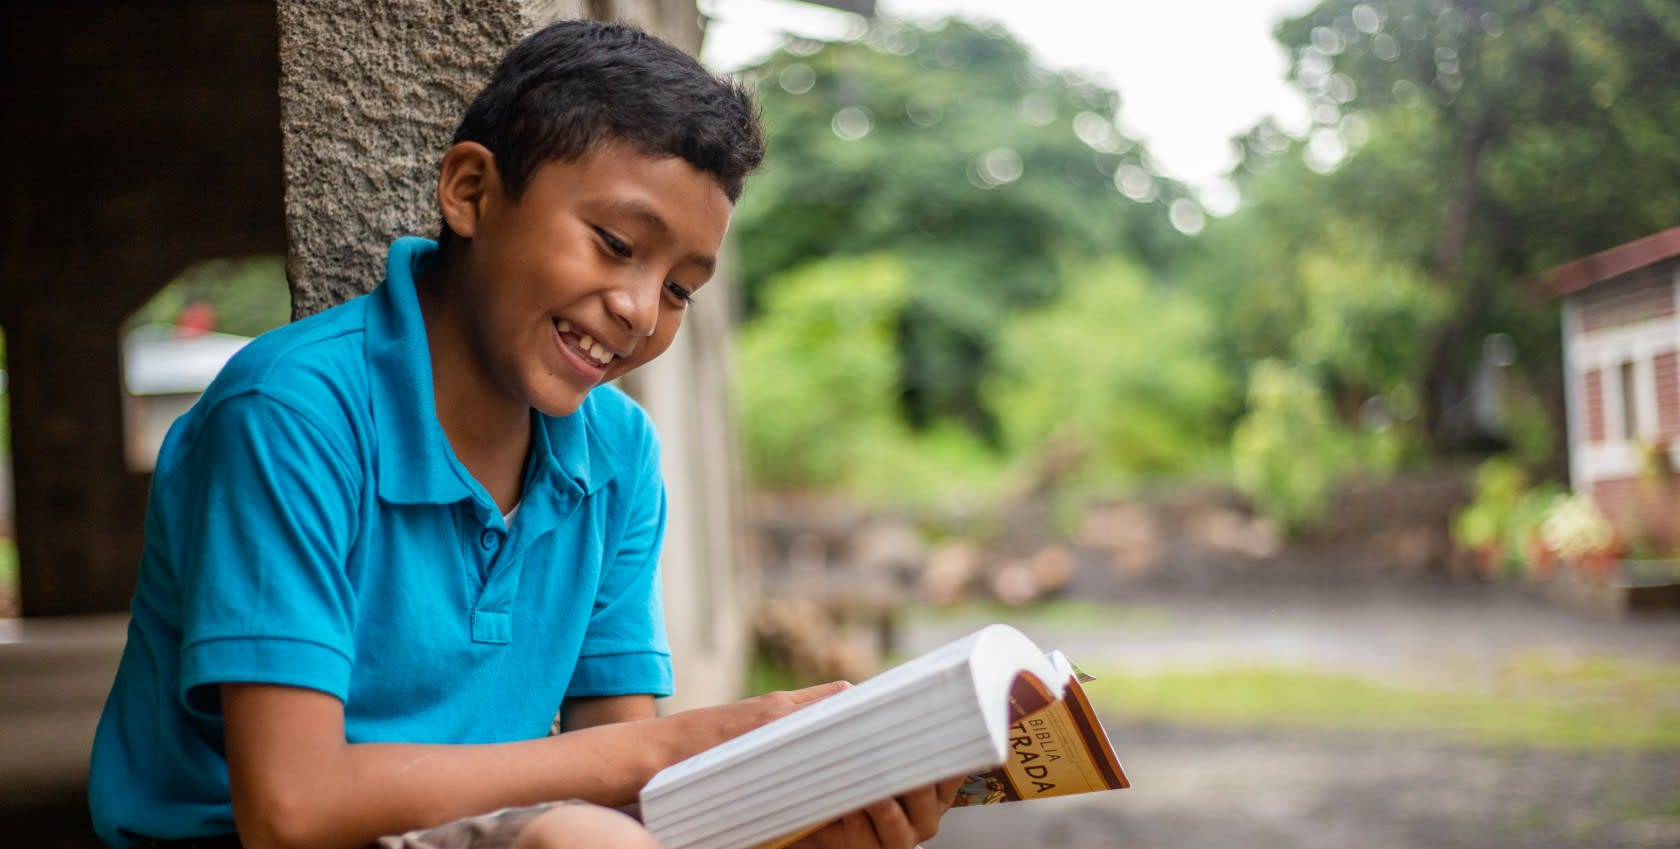 A boy reading a book with a big smile on his face